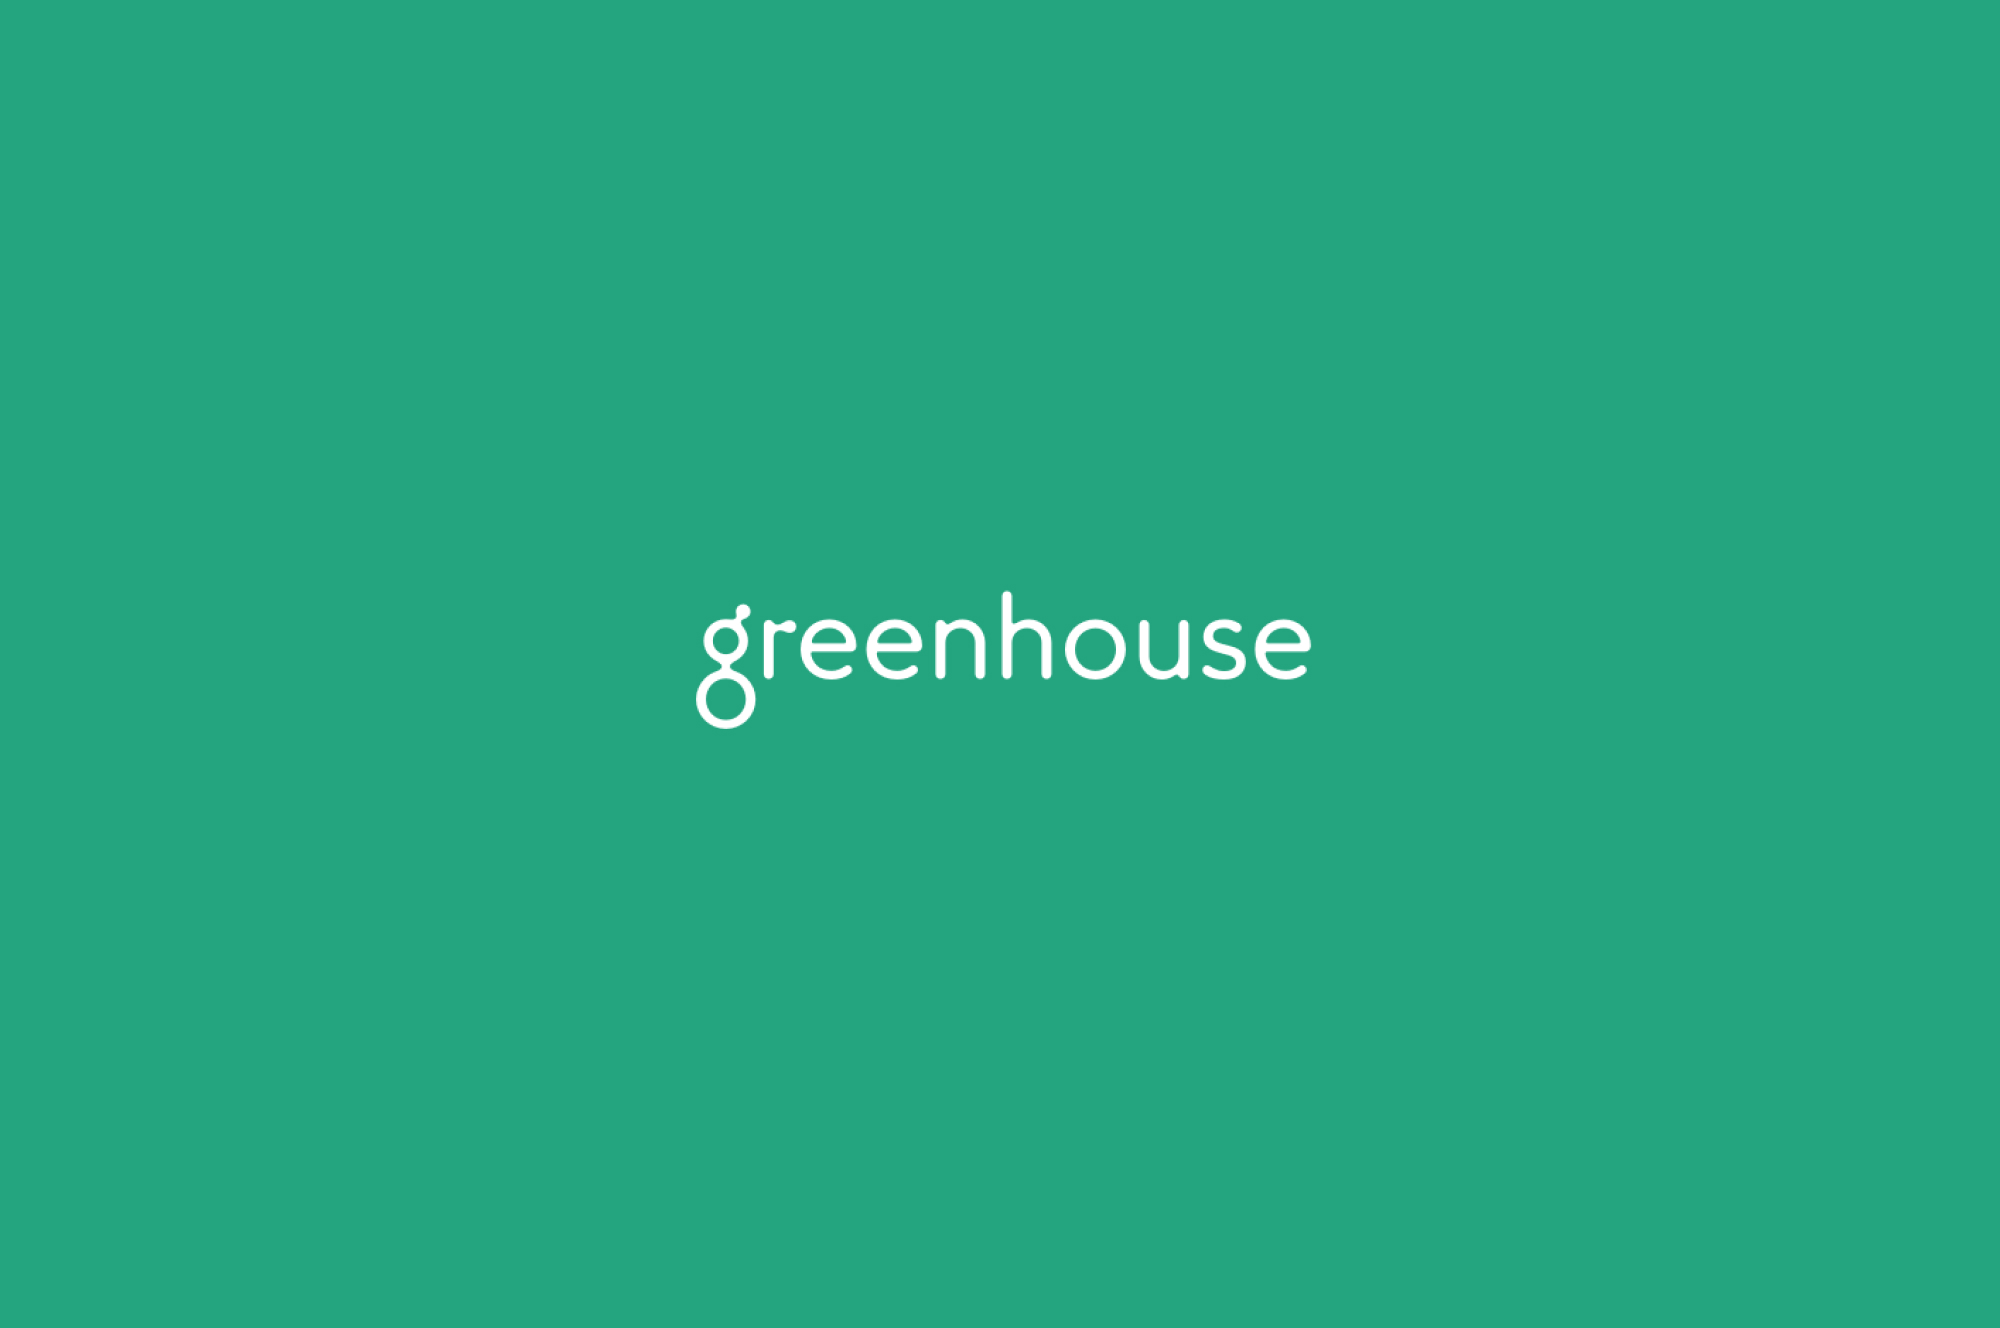 https://frakton.com/why-we-chose-greenhouse-for-a-modern-talent-acquisition-process/